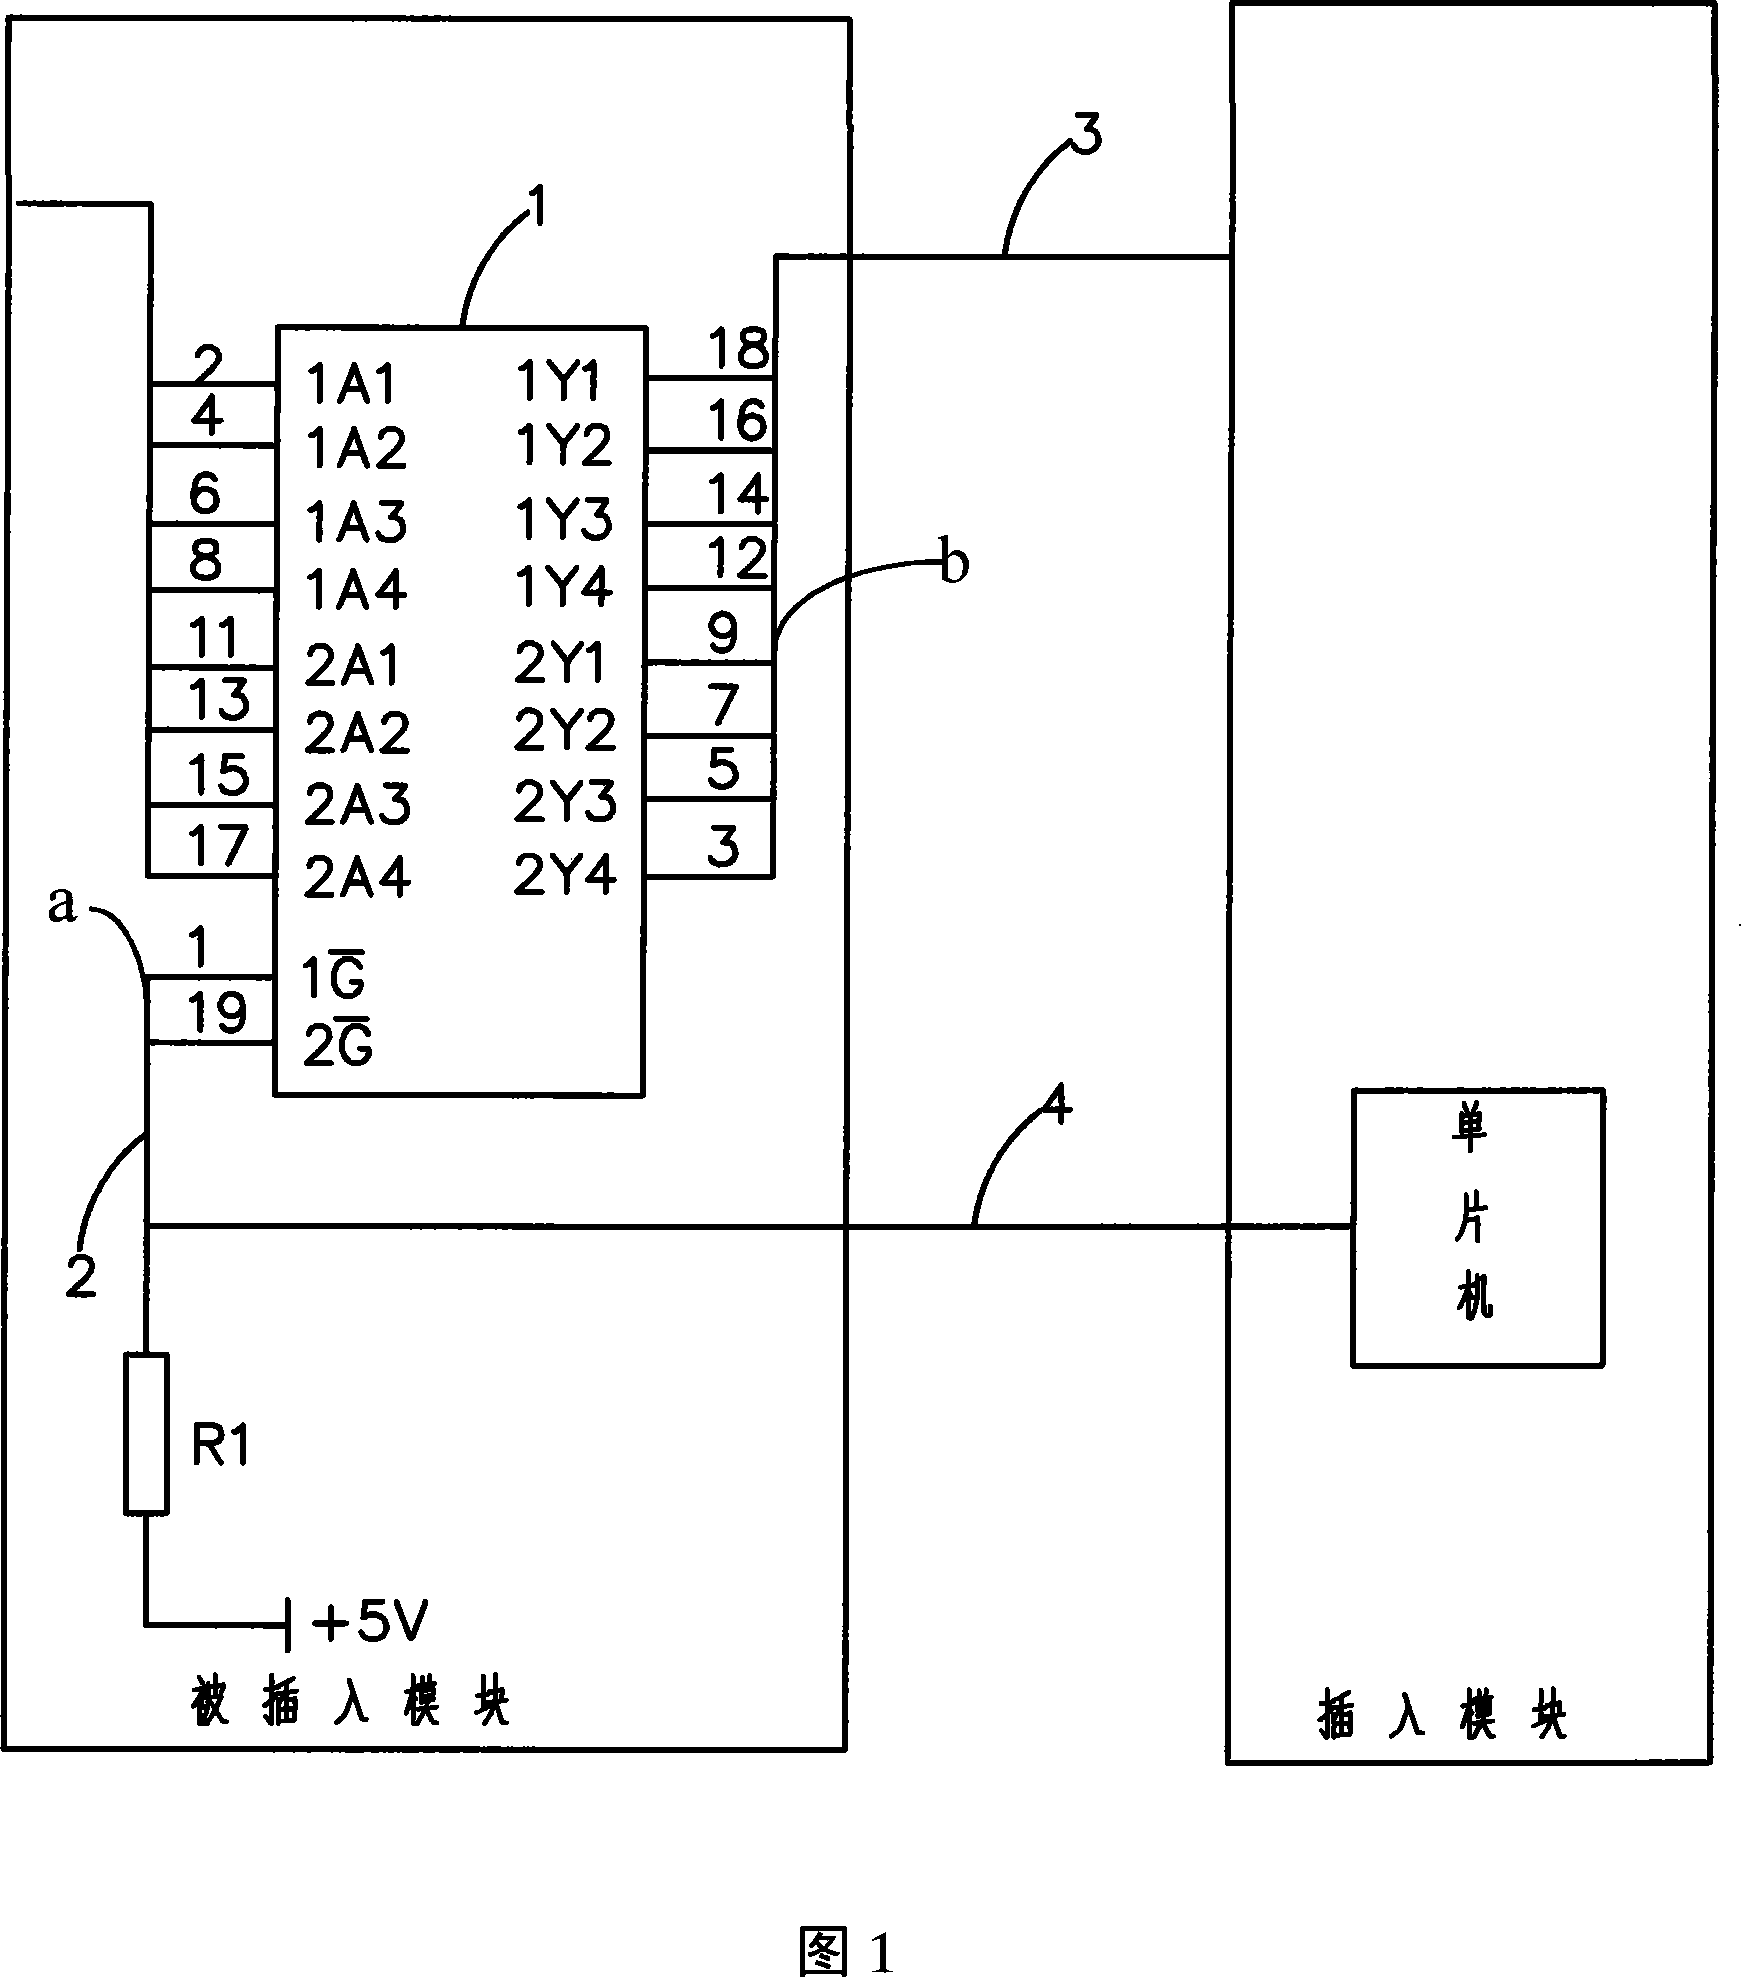 Protection circuit for interface signal hot-plug